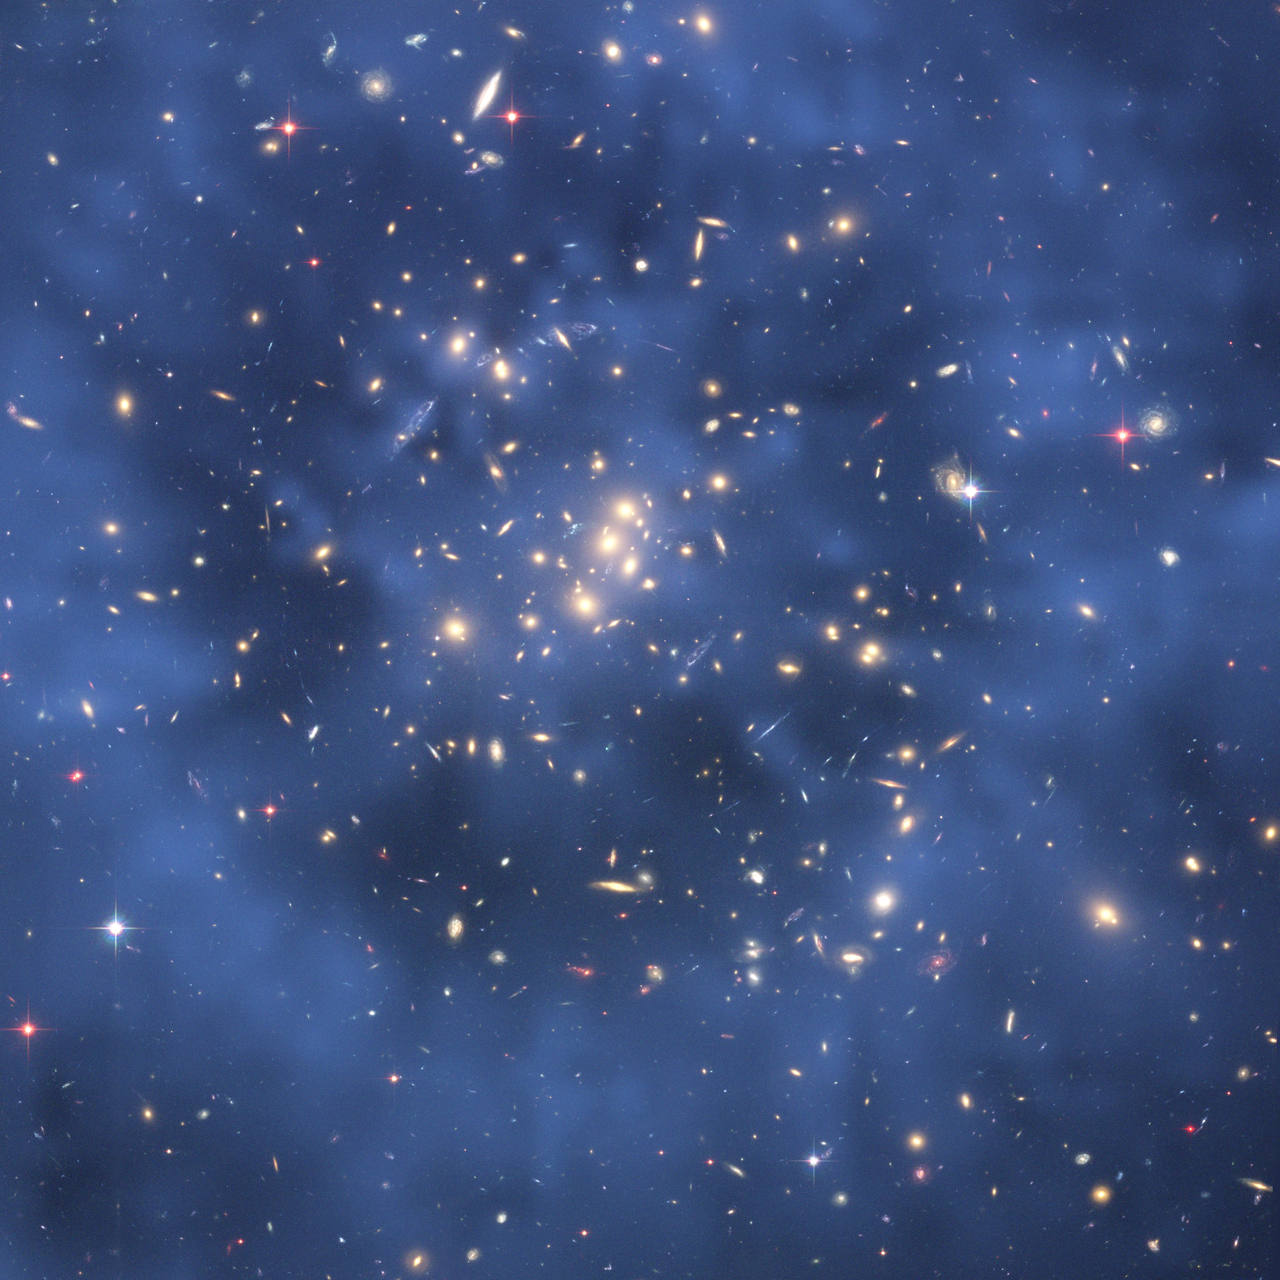 New Dark Matter Theory Weighs Superheavy Particle